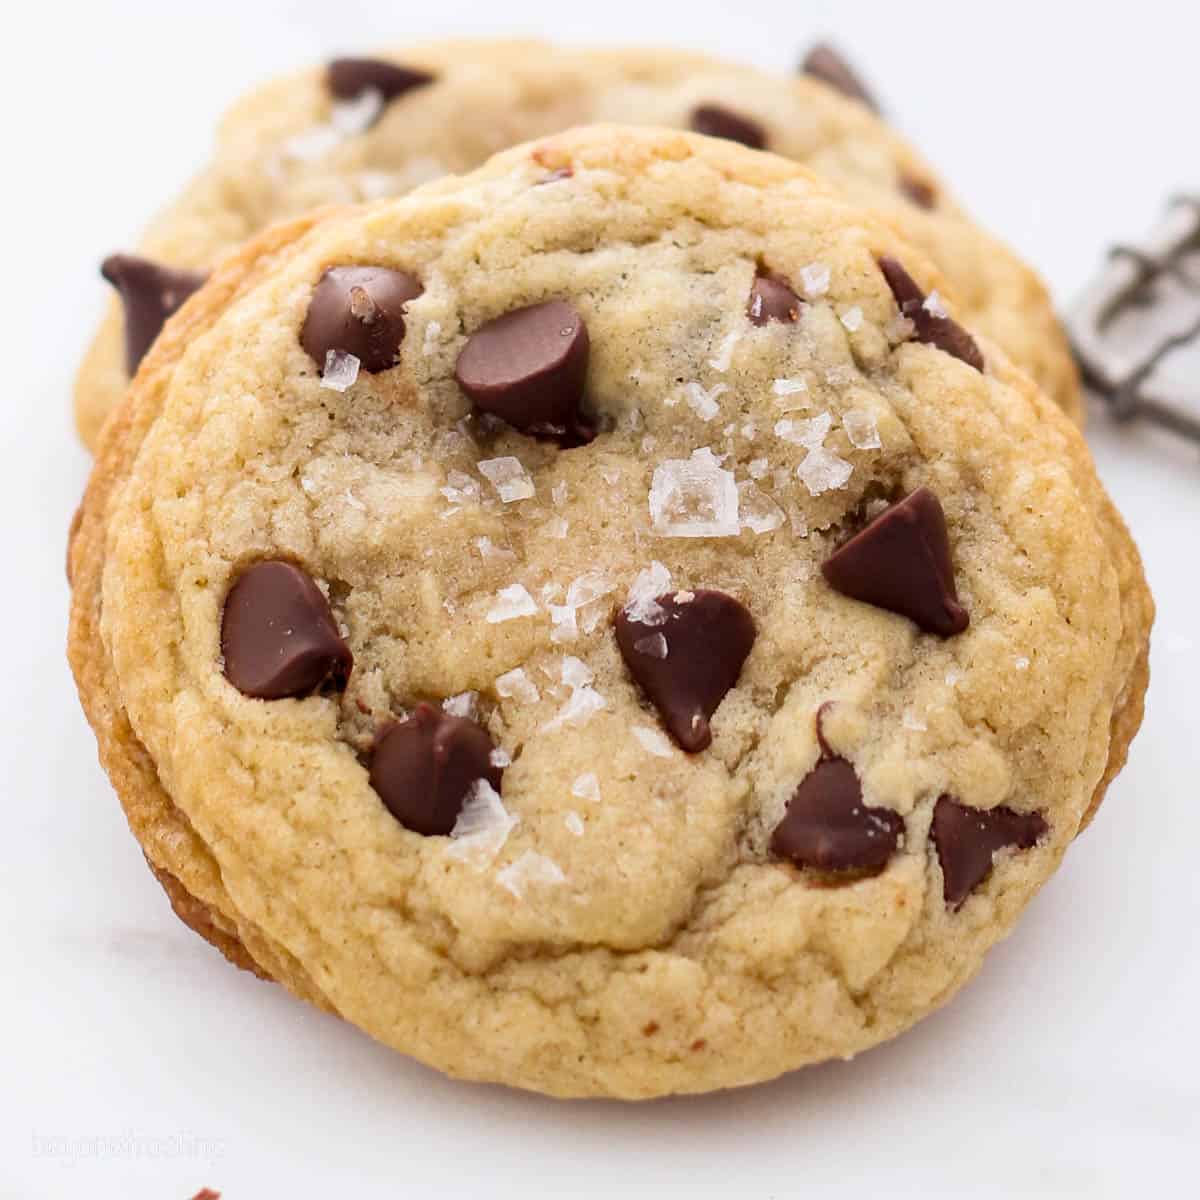 https://beyondfrosting.com/wp-content/uploads/2019/03/Chewy-Chocolate-Chip-Cookies-139-2.jpg